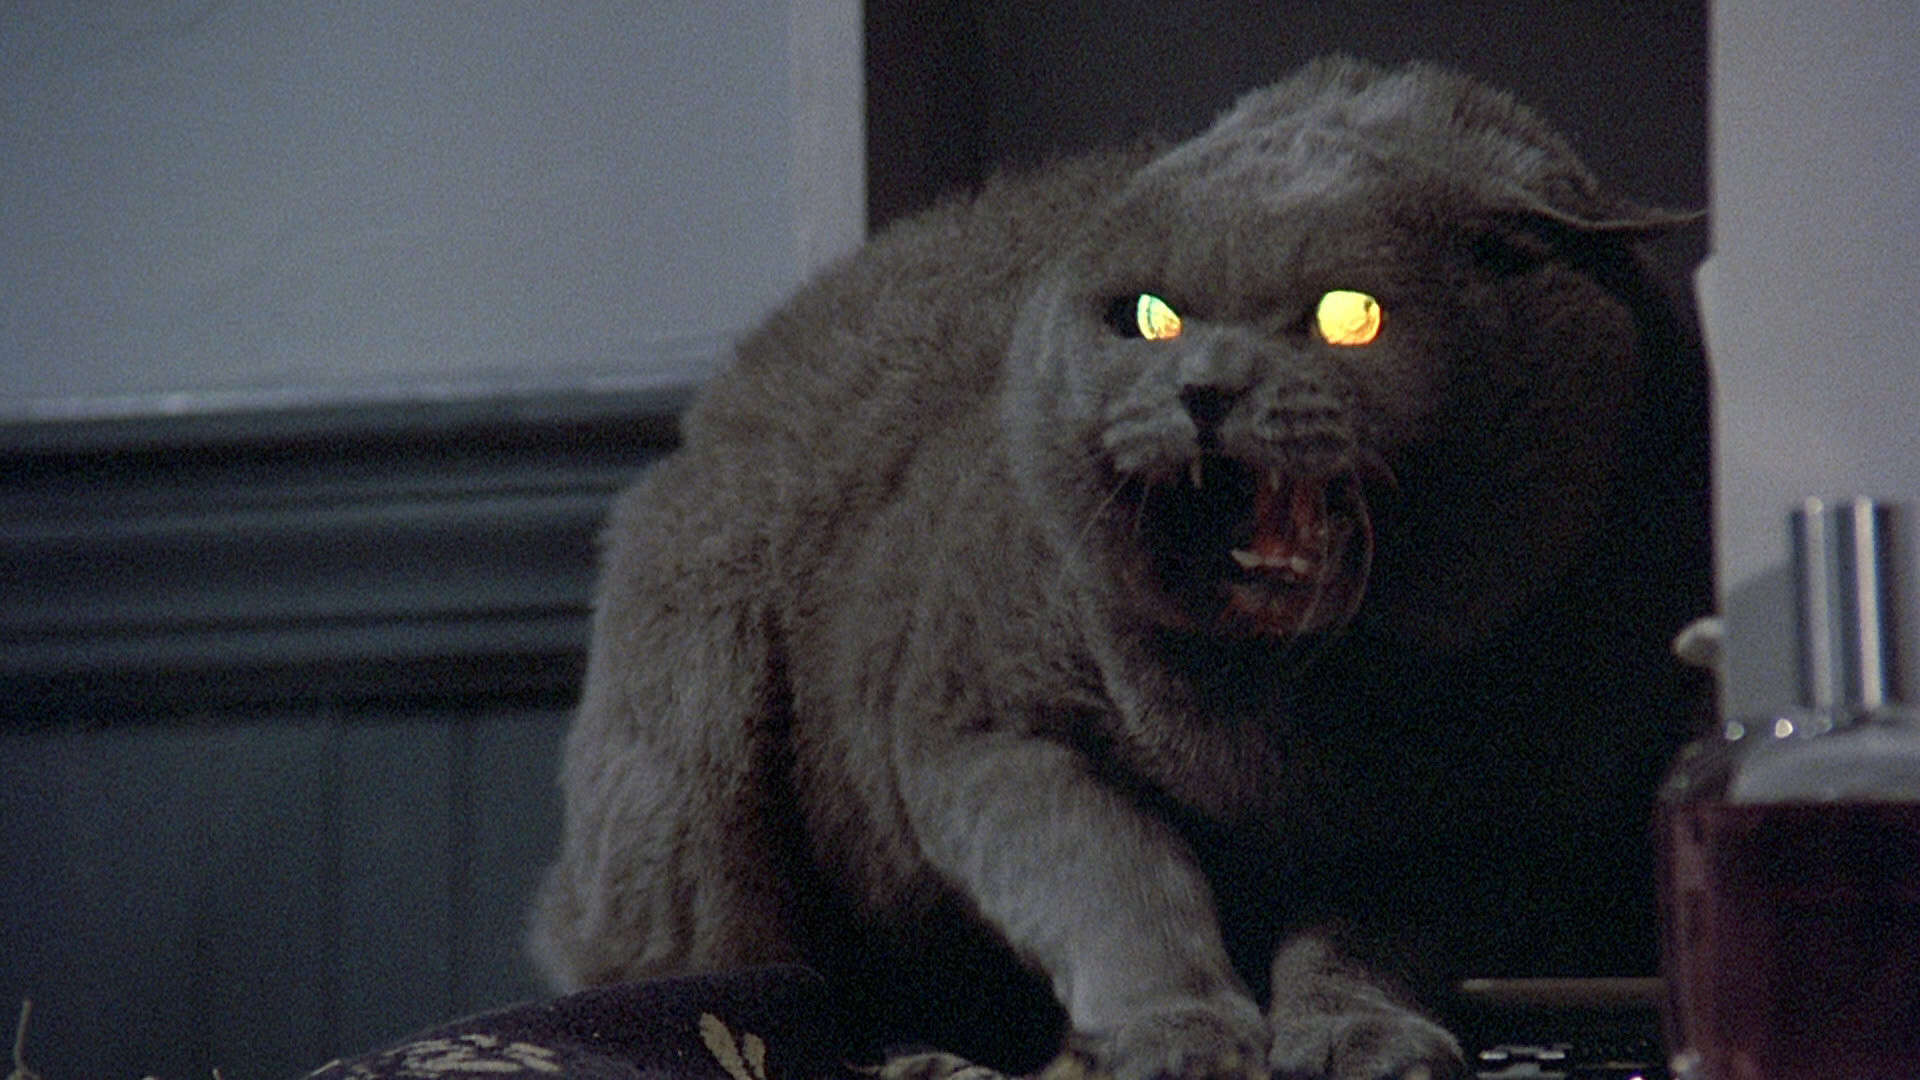 Pet Sematary proved Stephen King can indeed write a good ending